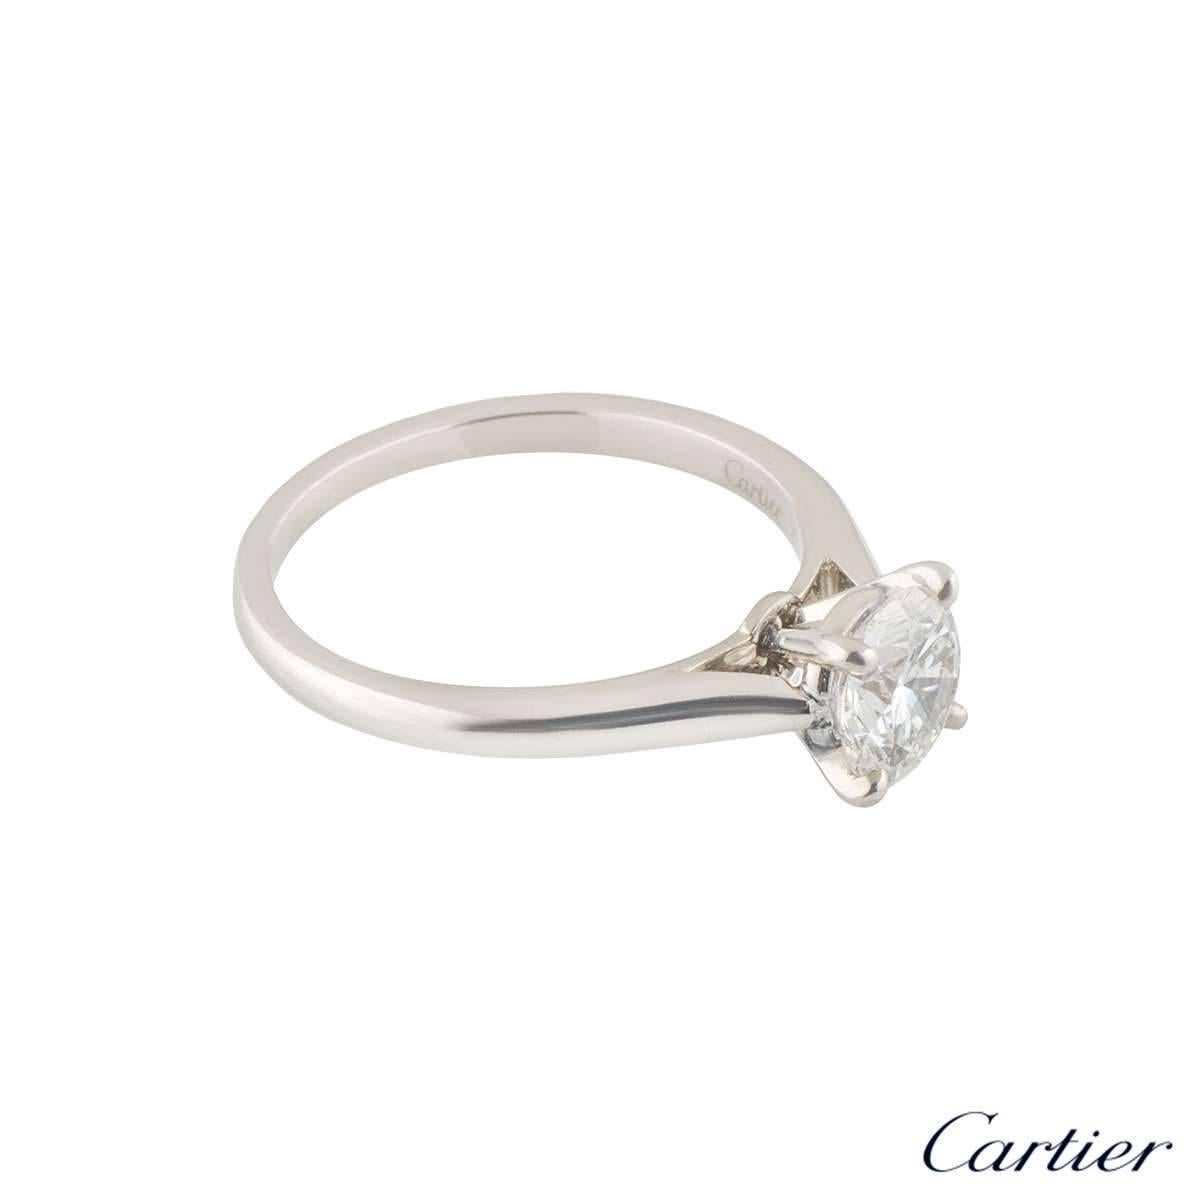 A beautiful platinum Cartier diamond engagement ring from the 1895 Solitaire collection. The ring comprises of a round brilliant cut diamond in a 4 claw setting with a total weight of 0.85ct, E colour and VS1 clarity. The ring measures a US size 5,